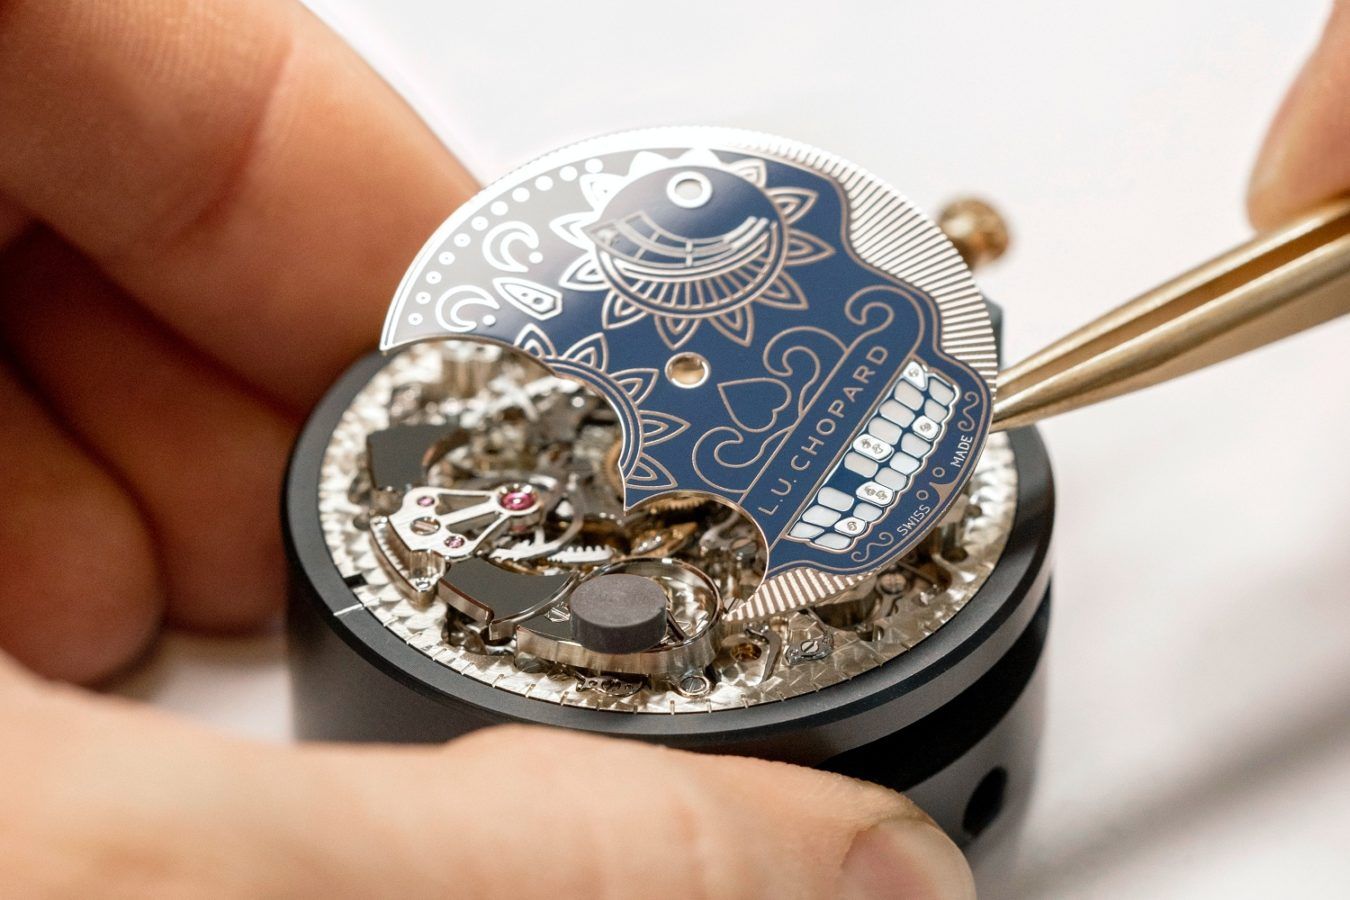 Chopard: Mastering complicated and high-precision movements